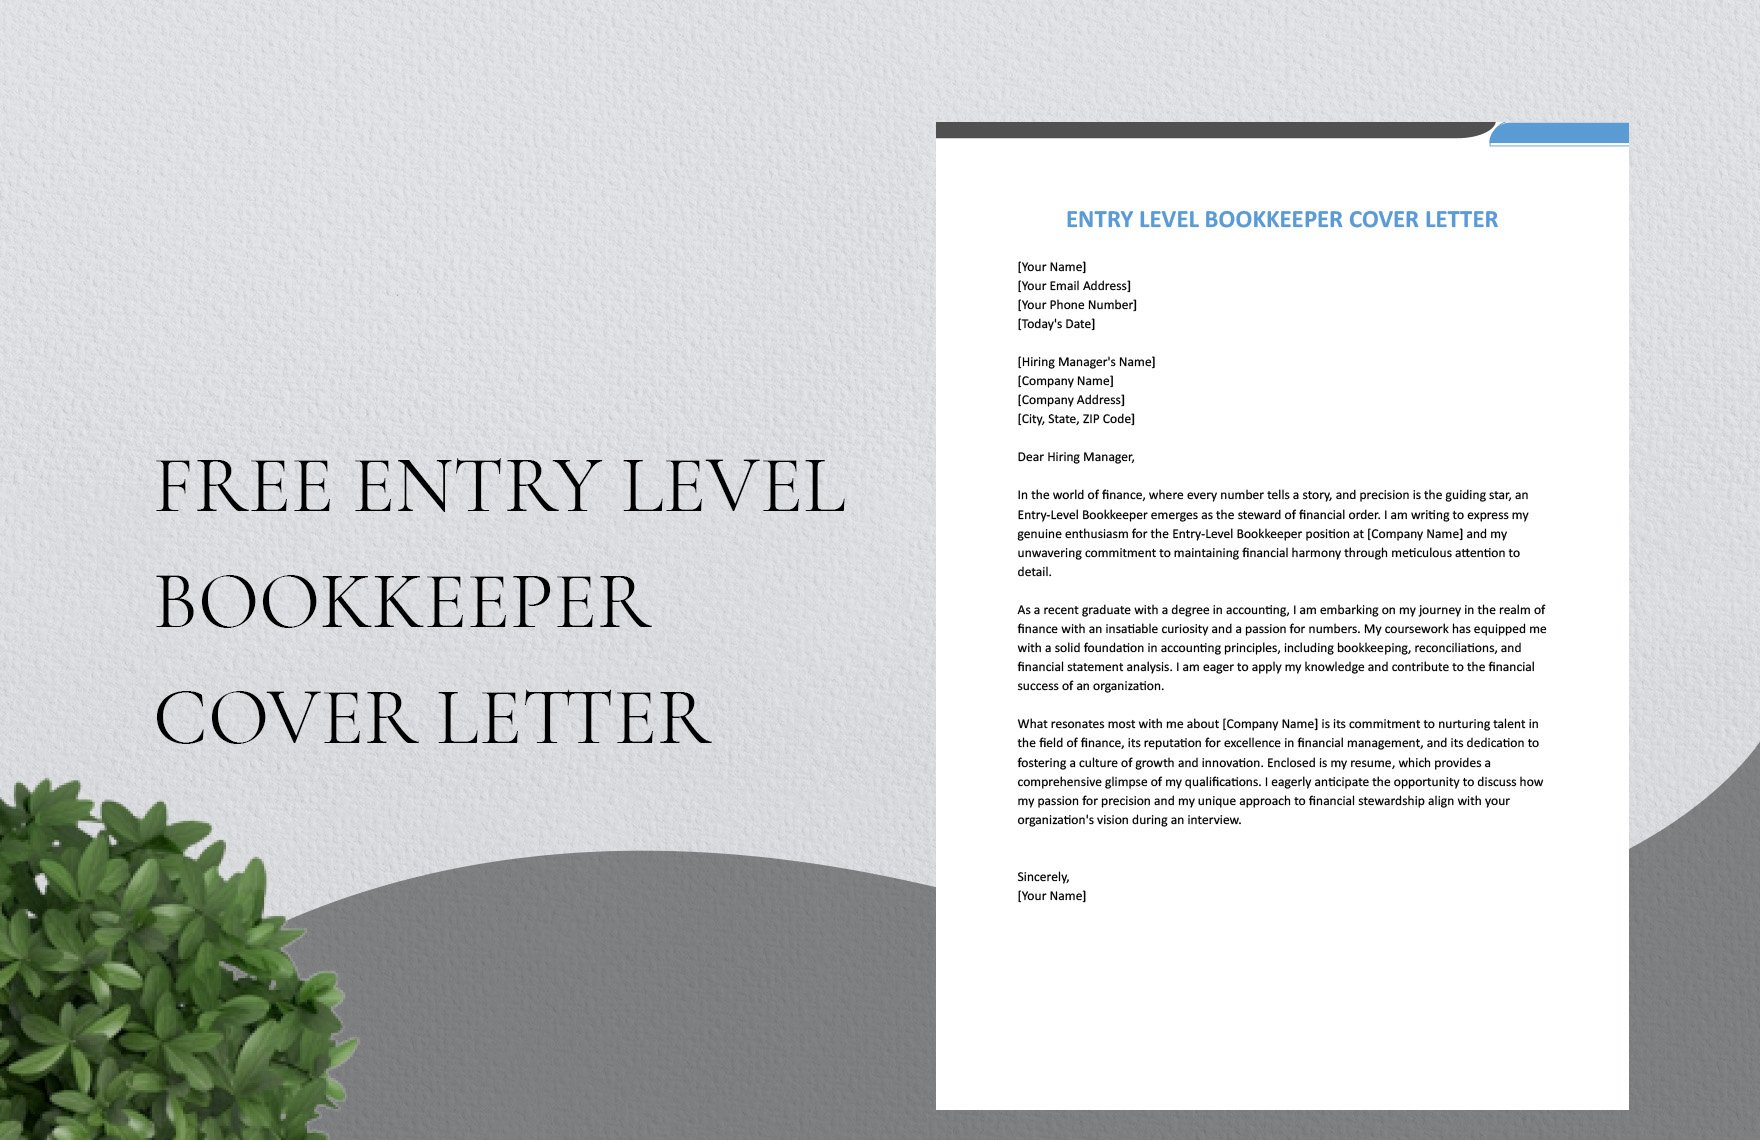 Entry Level Bookkeeper Cover Letter